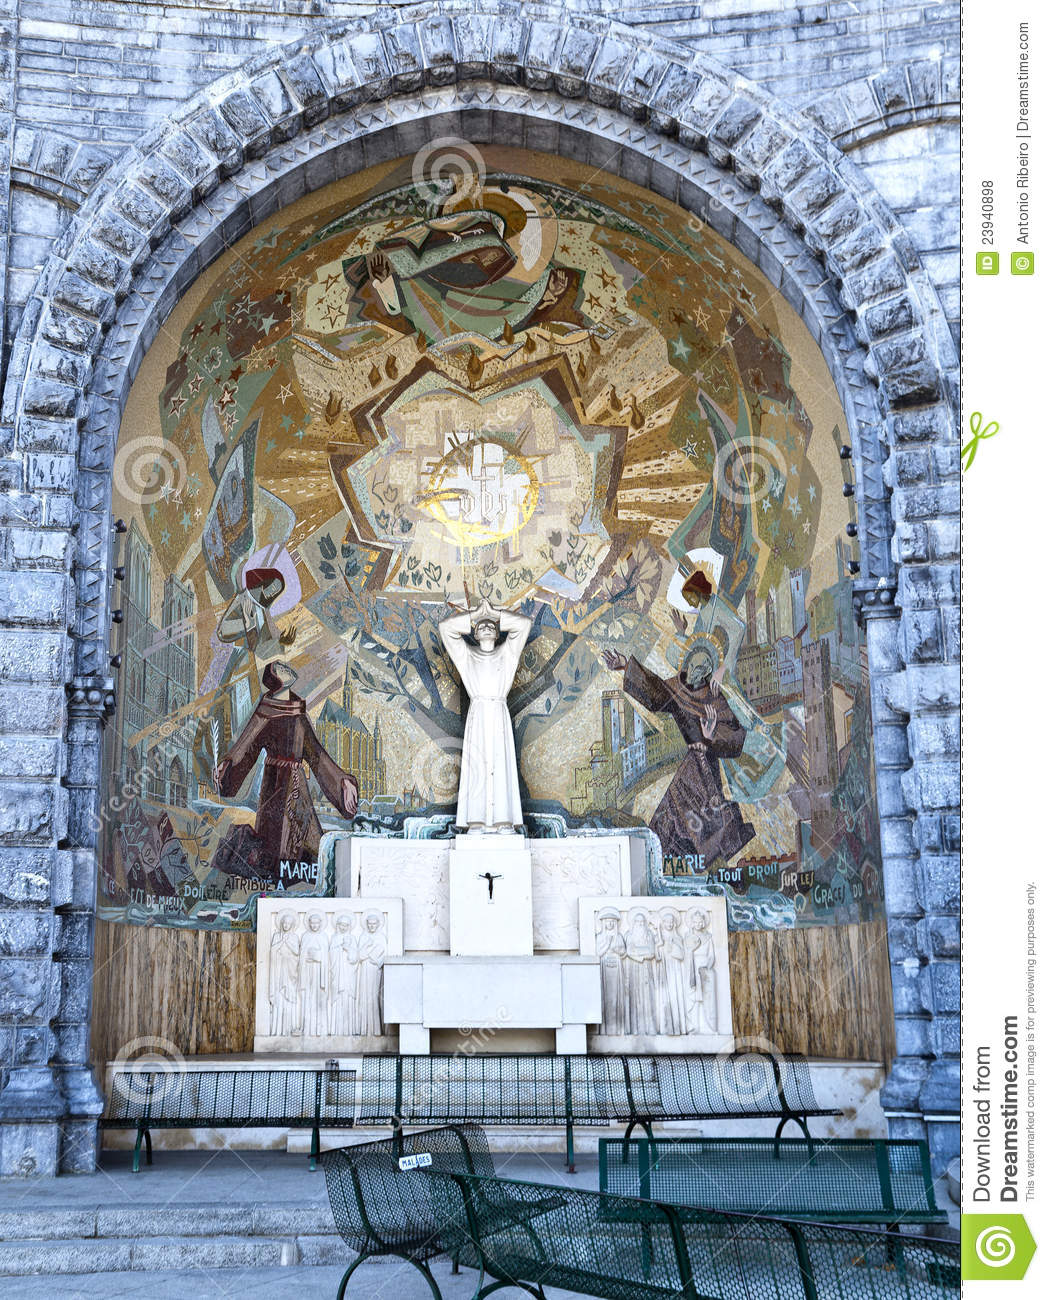 Basilica Of Our Lady Of The Rosary Royalty Free Stock Photos   Image    